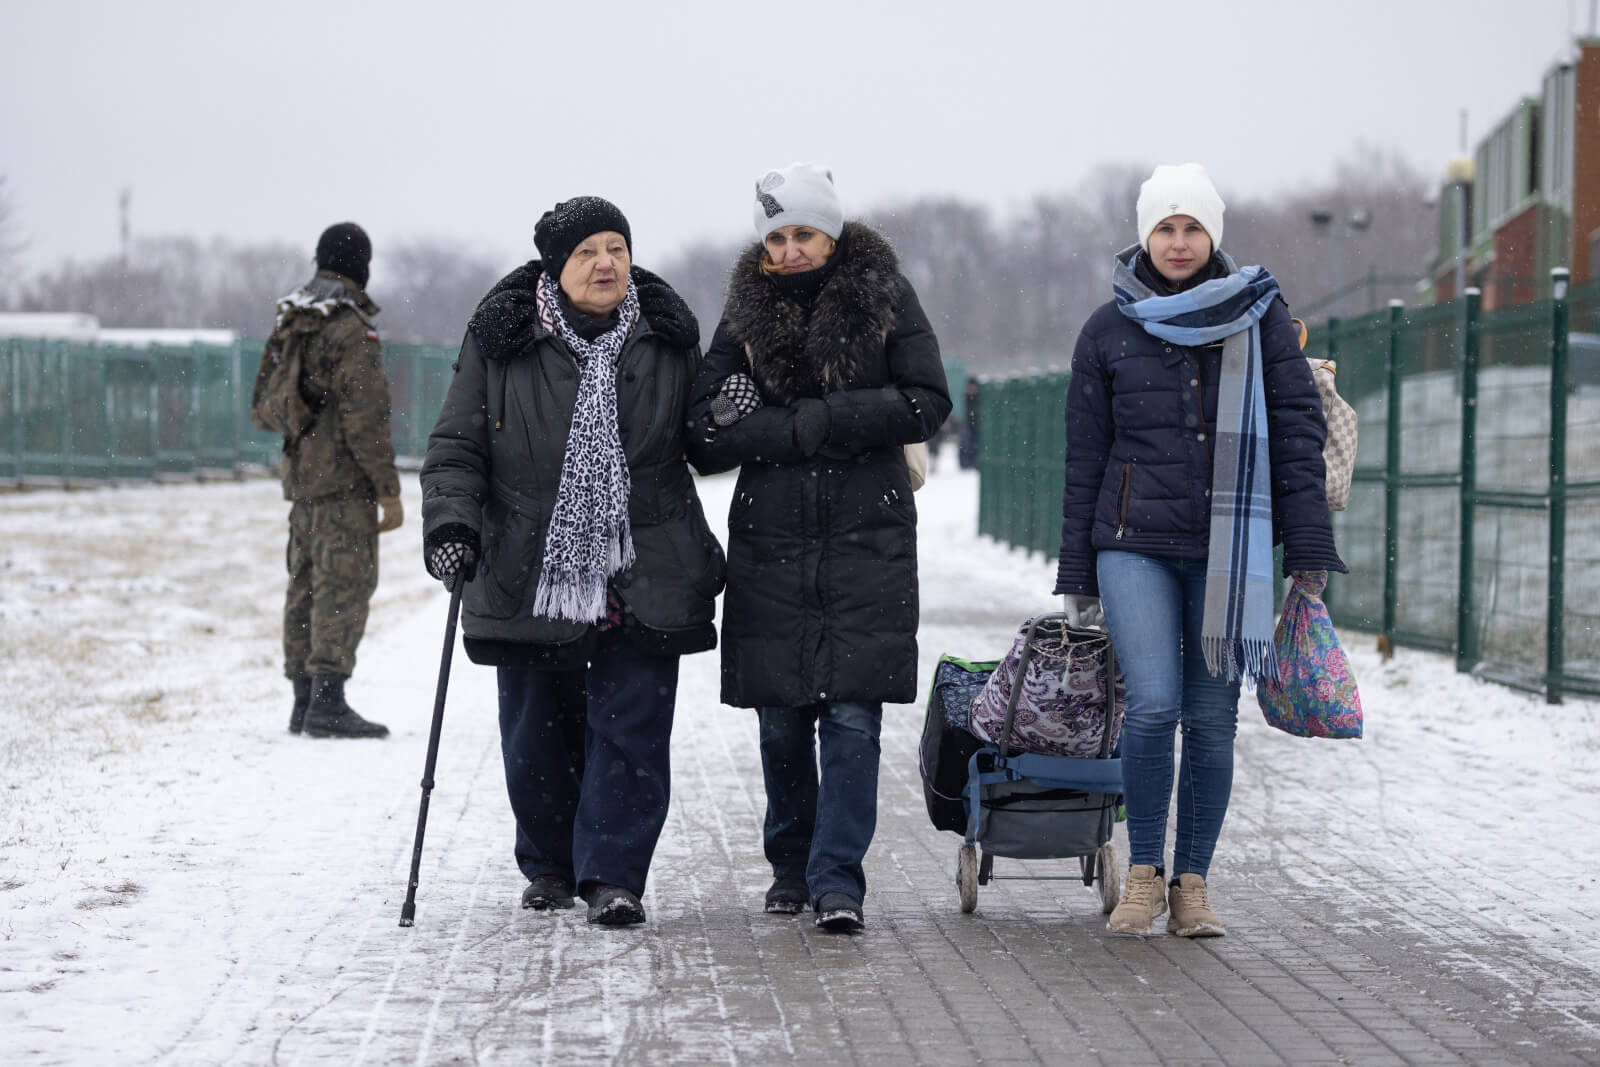 09/03/2022. Przemysl Poland. Svetlana age 77(L) her granddaughter Anna (C) and daughter Julia (R) from Ukraine cross the Medyka border crossing from Ukraine to Poland. Svetlana has to walk with a stick due to her age. The family drove two days with Anna's father from Naples Italy to reach the border and now they will drive the return journey with Svetlana. Anna said: we looked at the possibilities of how to take her [Svetlana] and the only one was to go by car from the south of Italy to here. We were driving for two days. We will stay in a hotel and then go two days by car back to Napoli. Over two million people have now left Ukraine since Russia invaded the country on 24 February 2022.